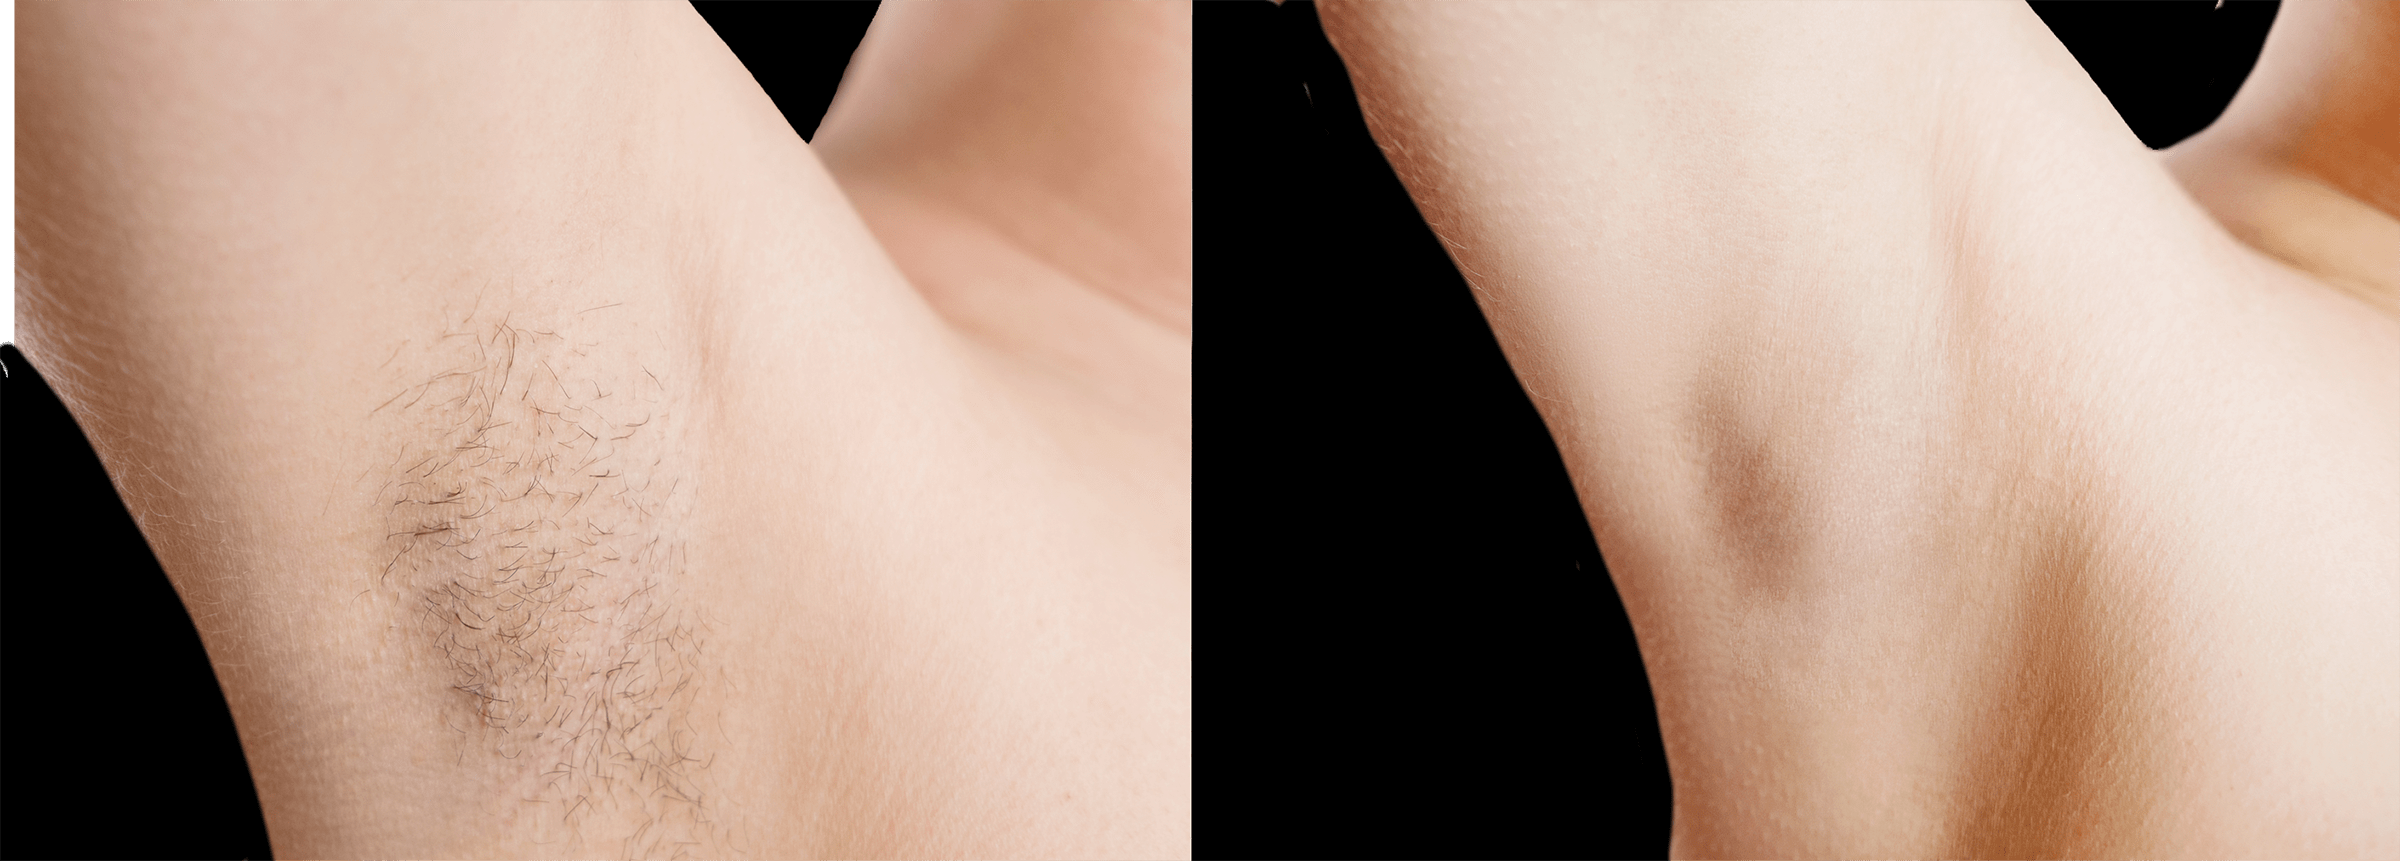 Long Island hair removal before and after